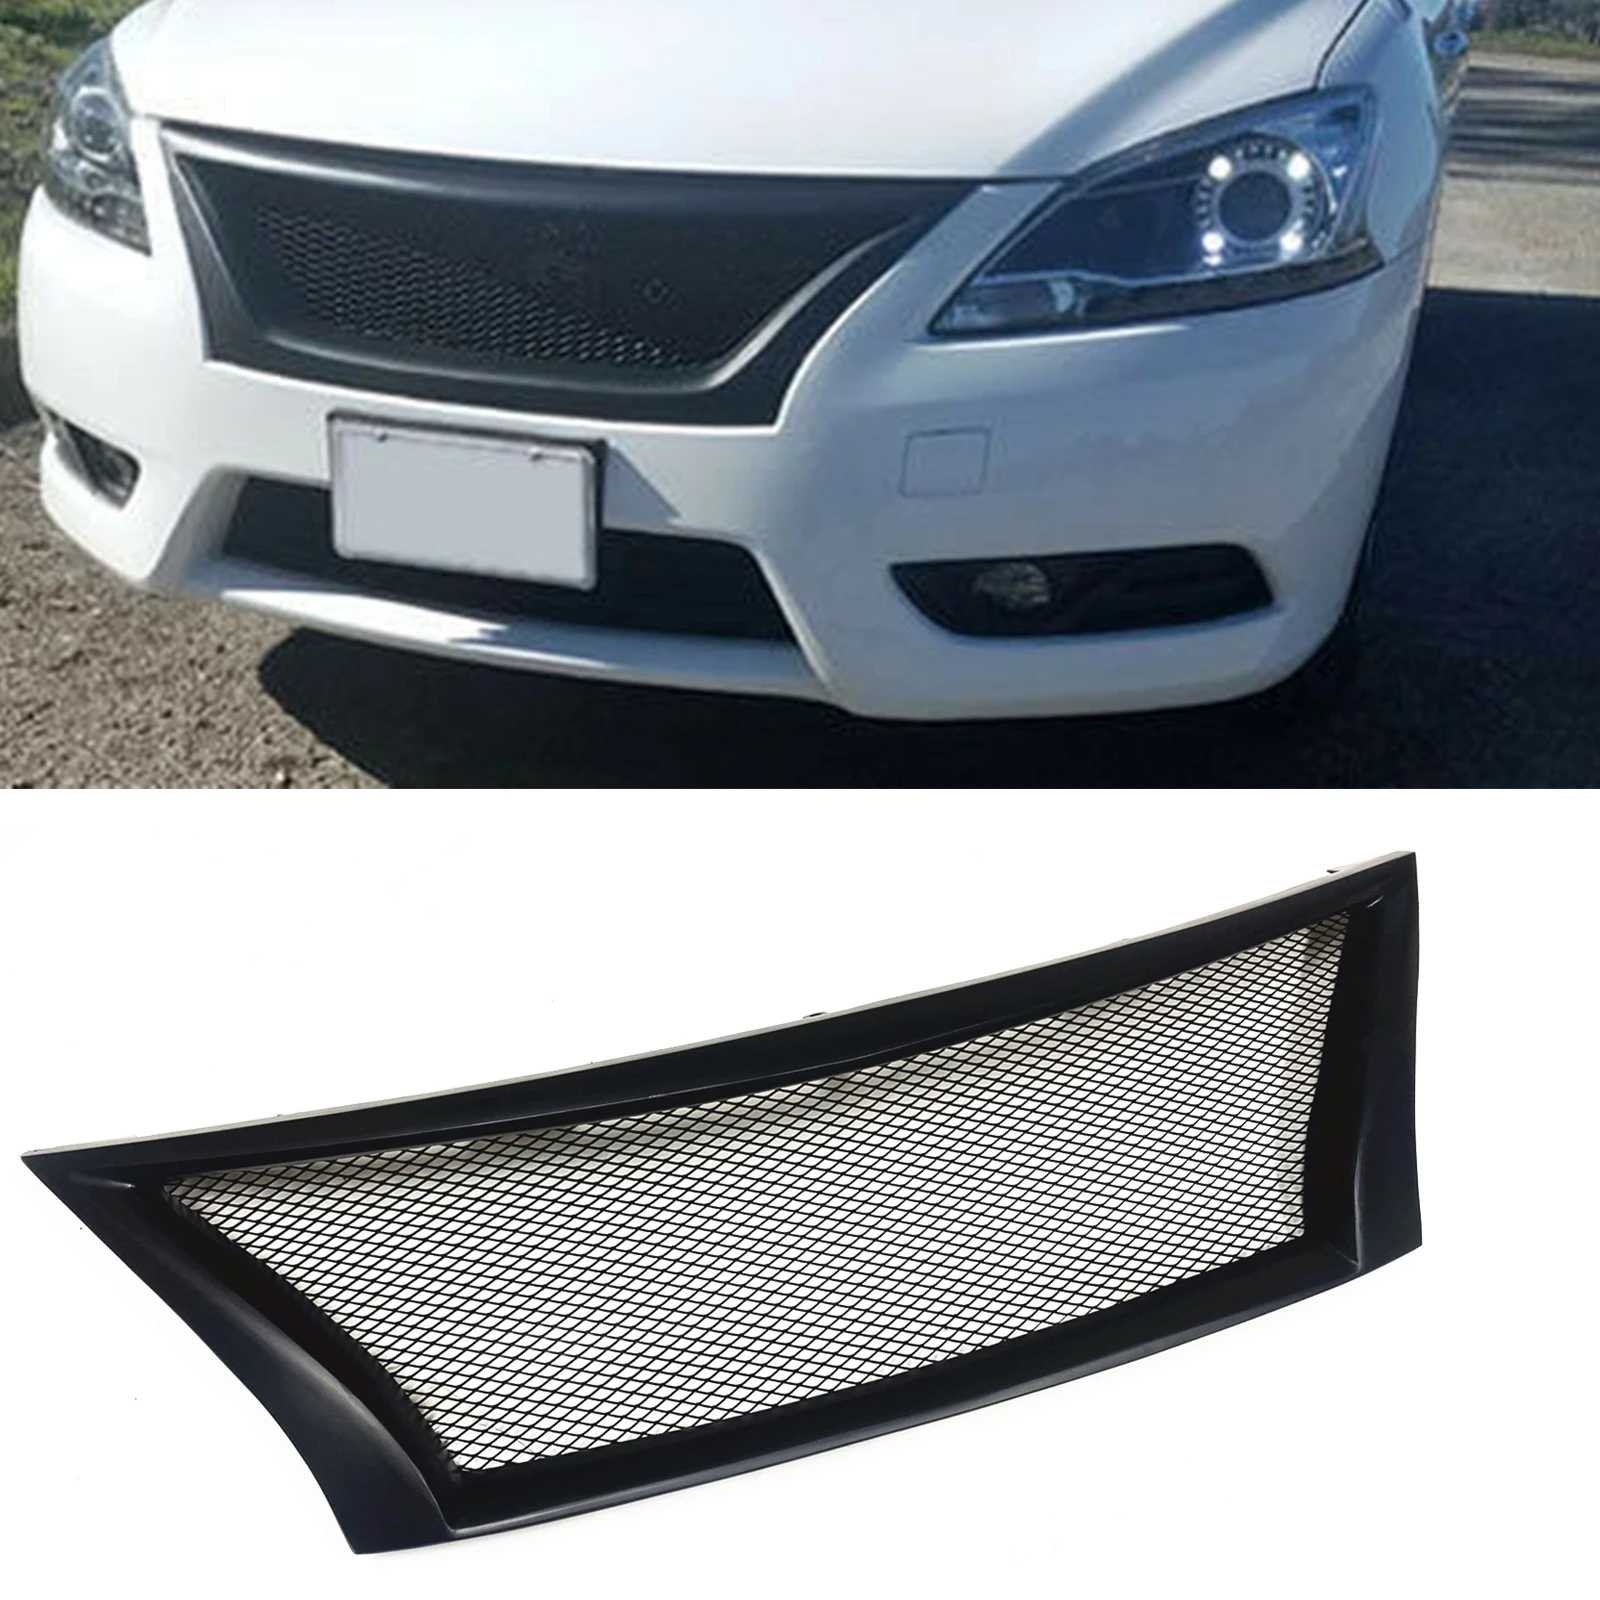 

Front Grille Racing Grill Upper Replacement Bumper Hood Mesh Vent Grid Auto Part For Nissan Sentra 2013-2015 Honeycomb Style